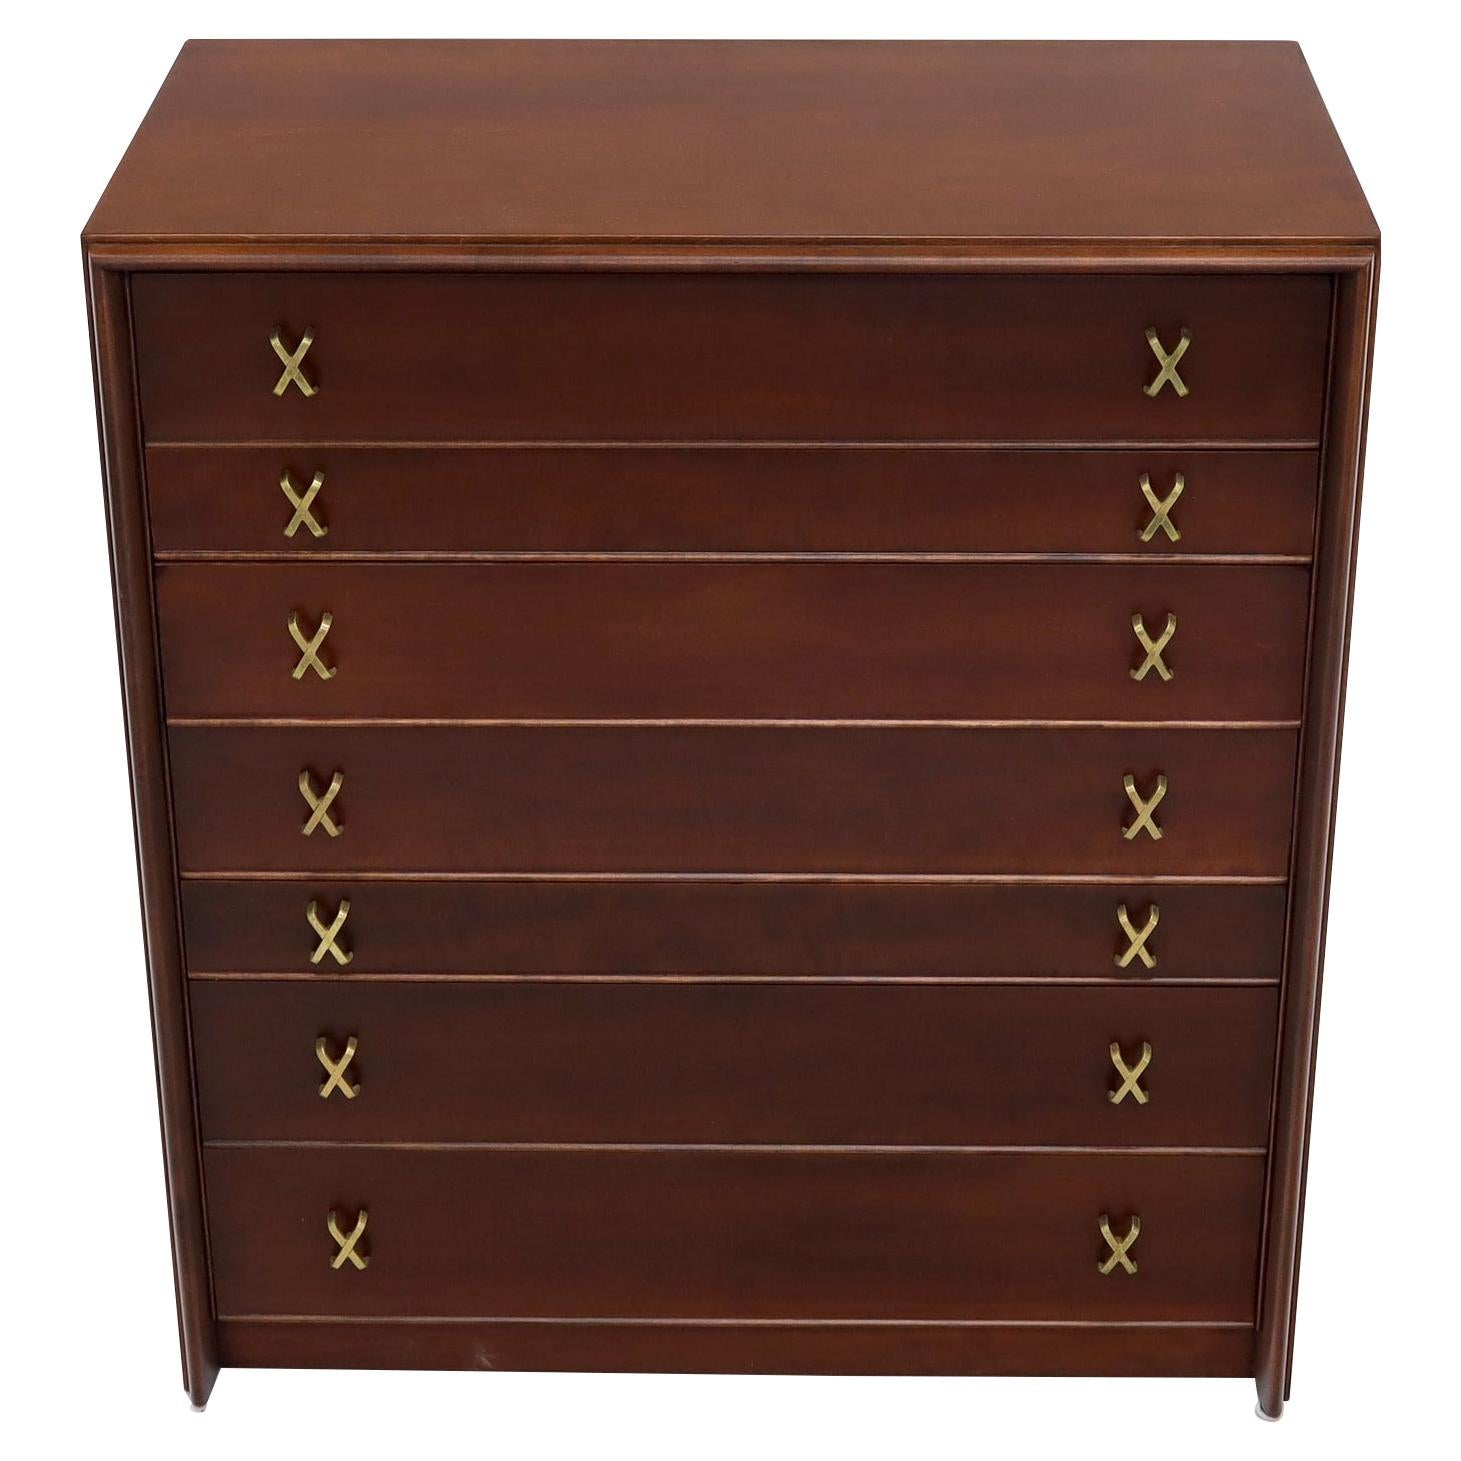 Paul Frankl Brass X-Pulls Brown Cherry High Chest with Drop Front Secretary For Sale